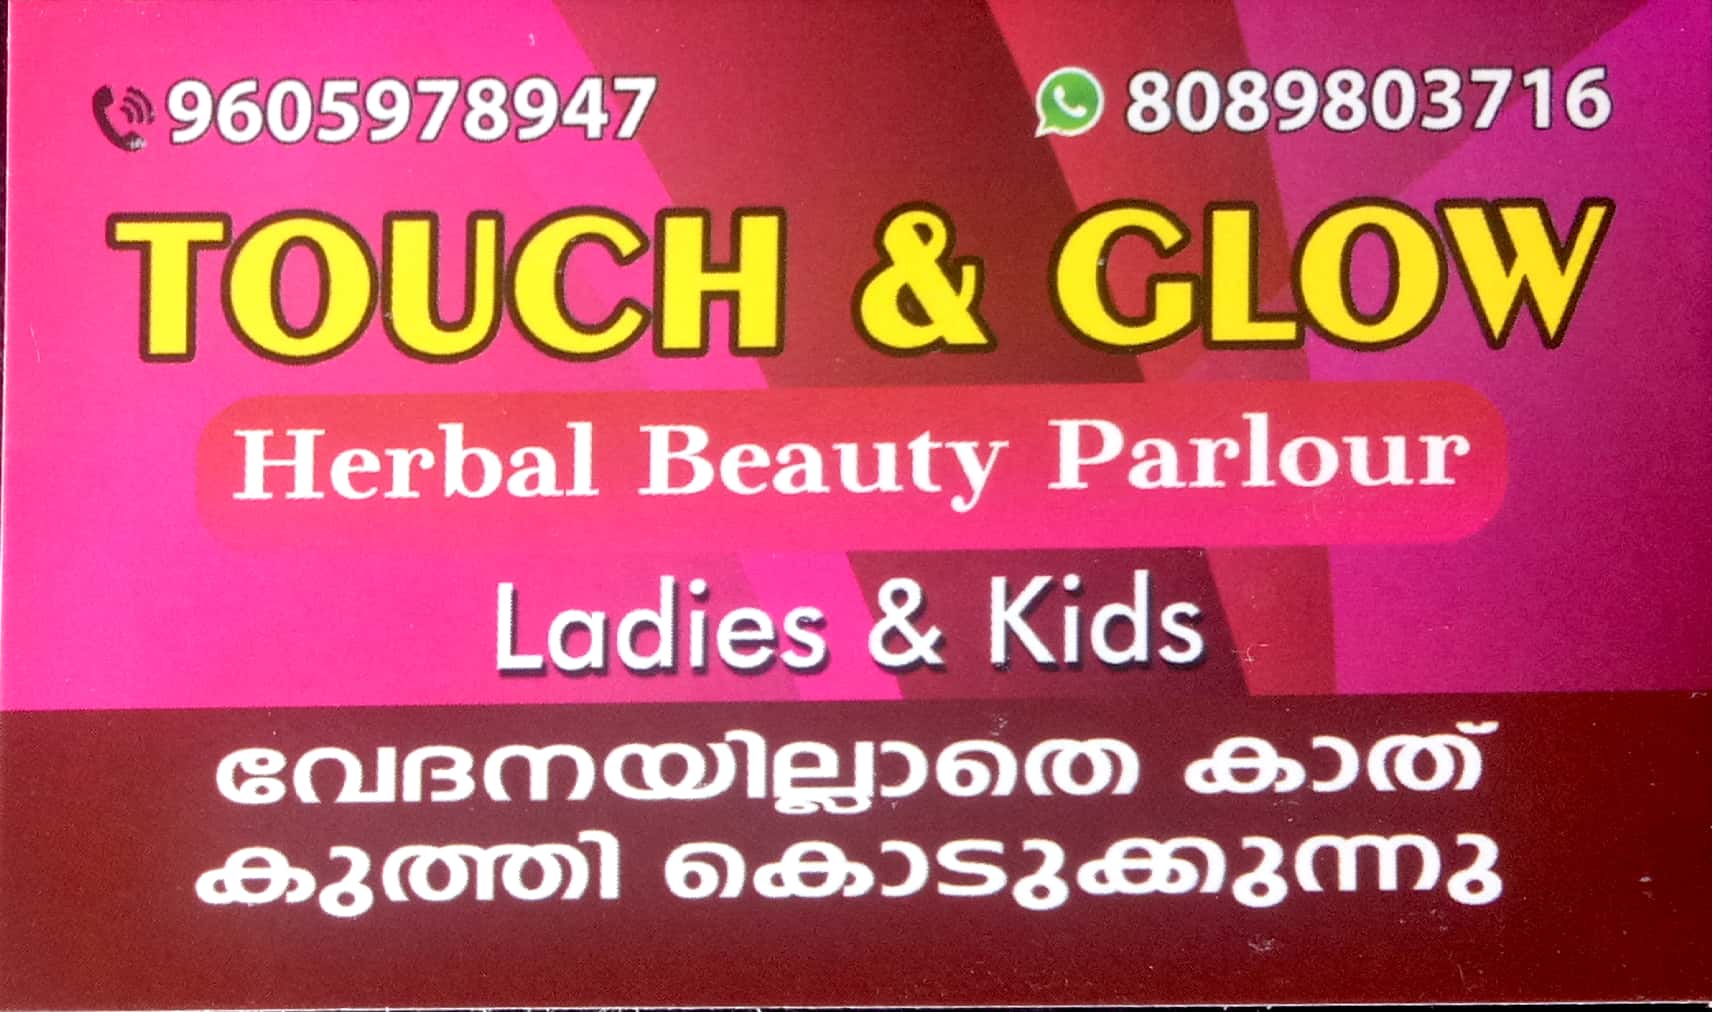 TOUCH & GLOW HERBAL BEAUTY PARLOUR, BEAUTY PARLOUR,  service in Kodungallur, Thrissur